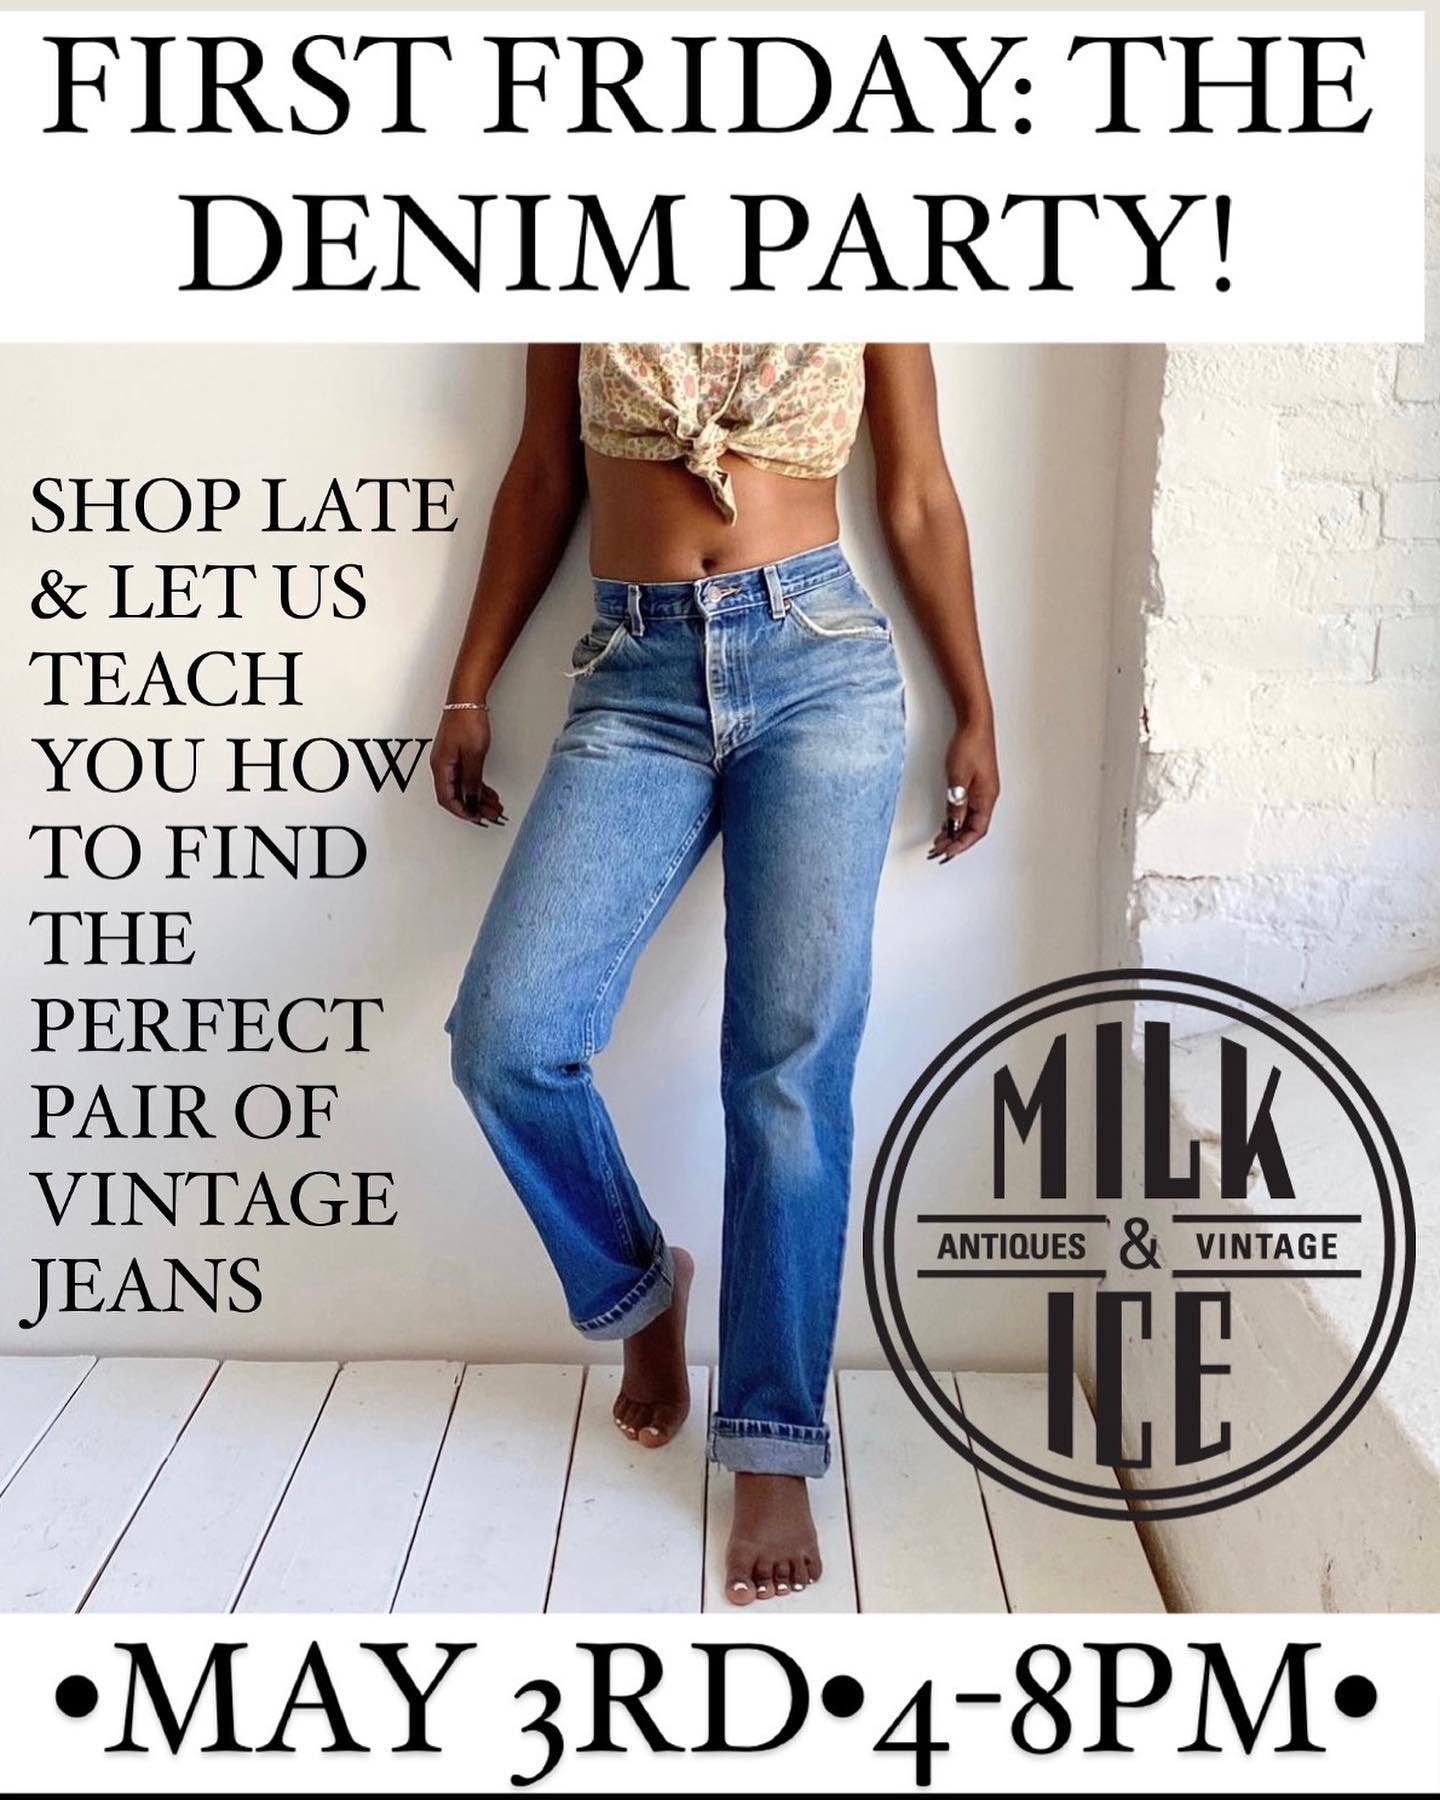 We&rsquo;re having a FIRST FRIDAY DENIM PARTY TOMORROW! Complimentary beer &amp; wine from 4-8pm while you shop our huge selection of top notch vintage jeans in an array of eras, styles &amp; sizes. Let us show you some tips &amp; tricks on how to fi